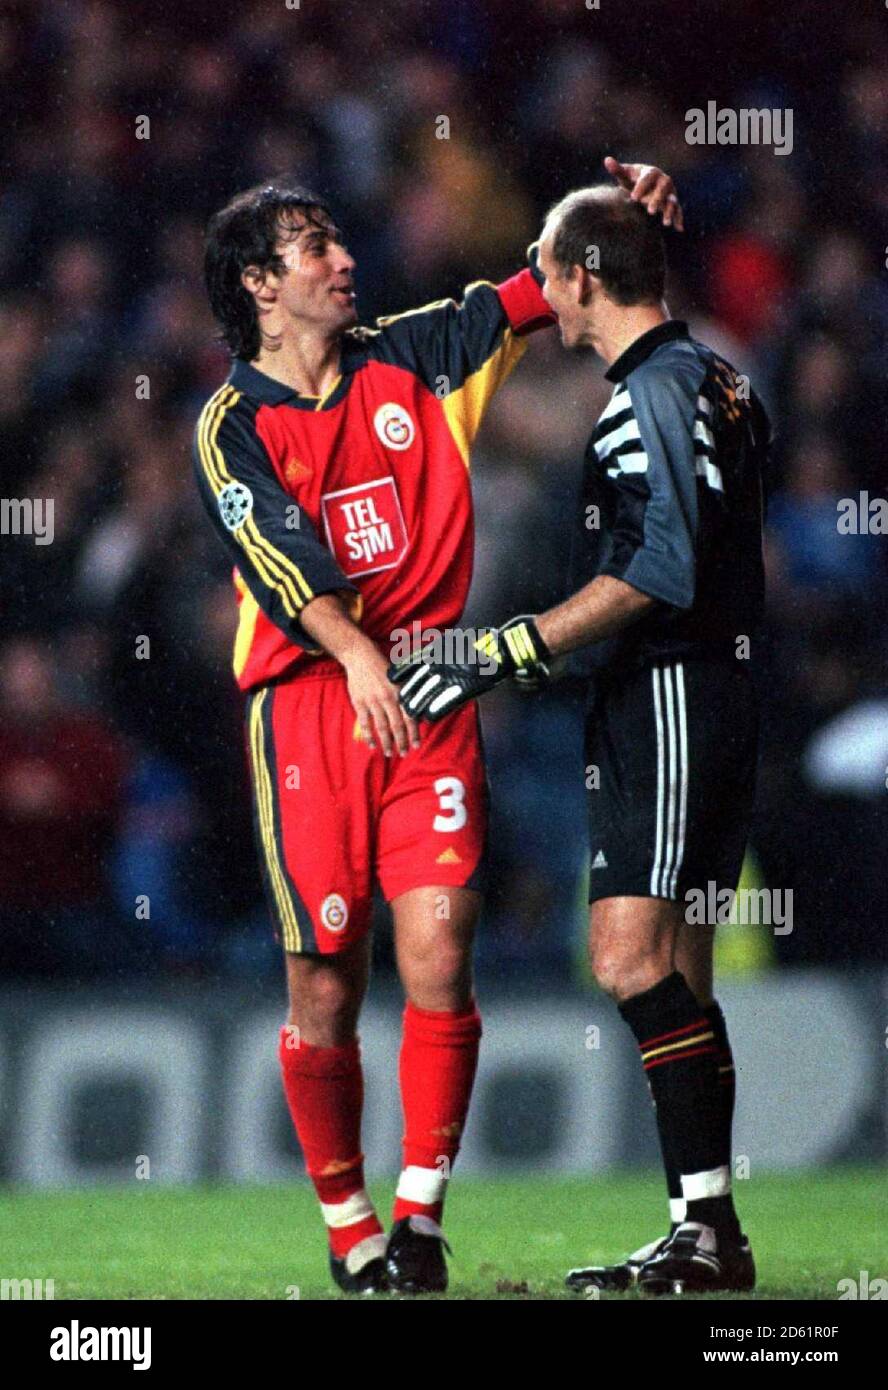 Galatasaray's goalkeeper Claudio Taffarel (r) is congratulated by teammate Bulent Korkmaz (l) at the final whistle Stock Photo